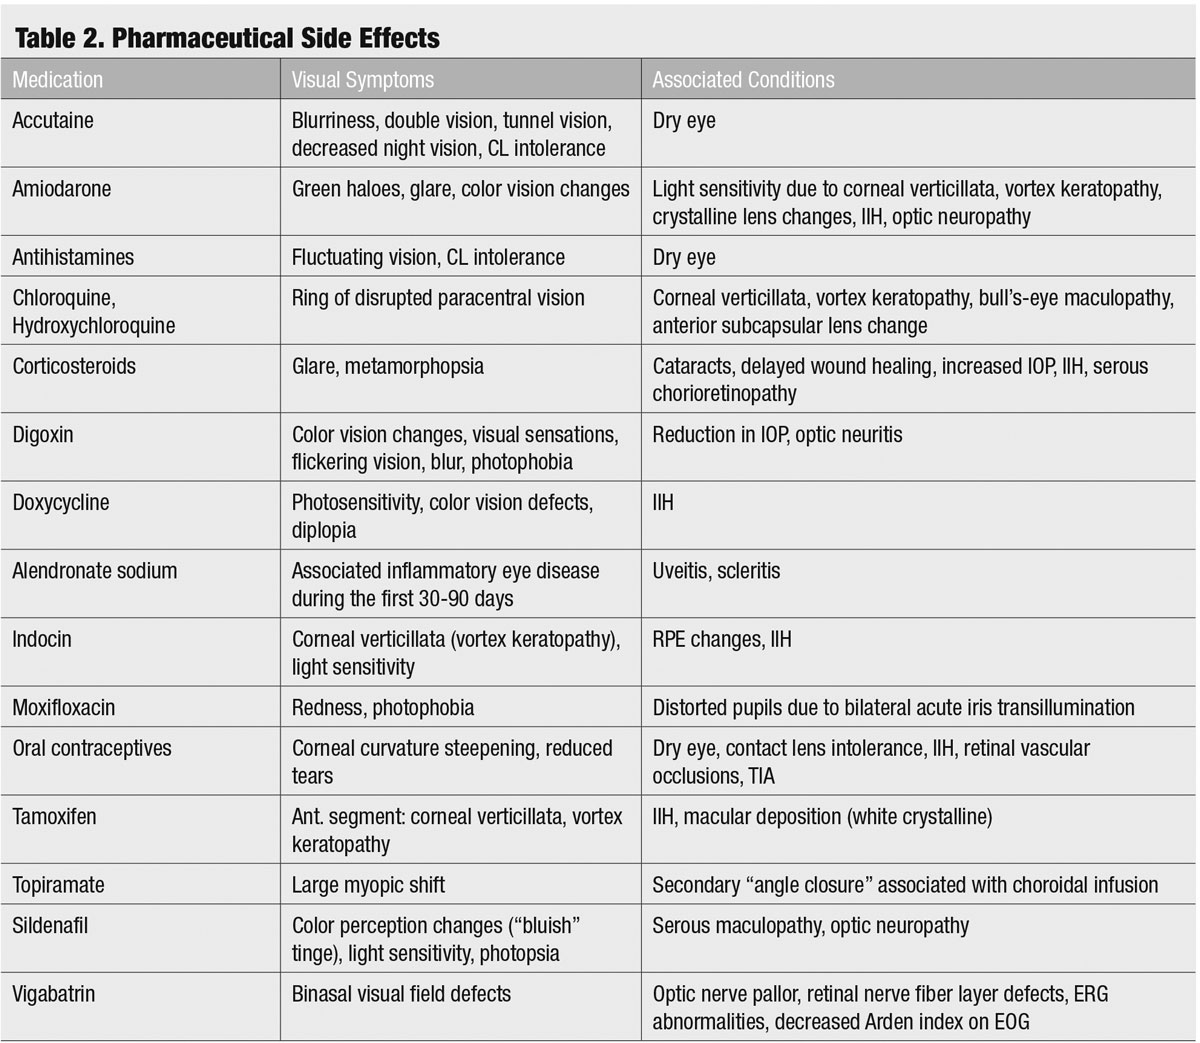 Table 2. Pharmaceutical Side Effects